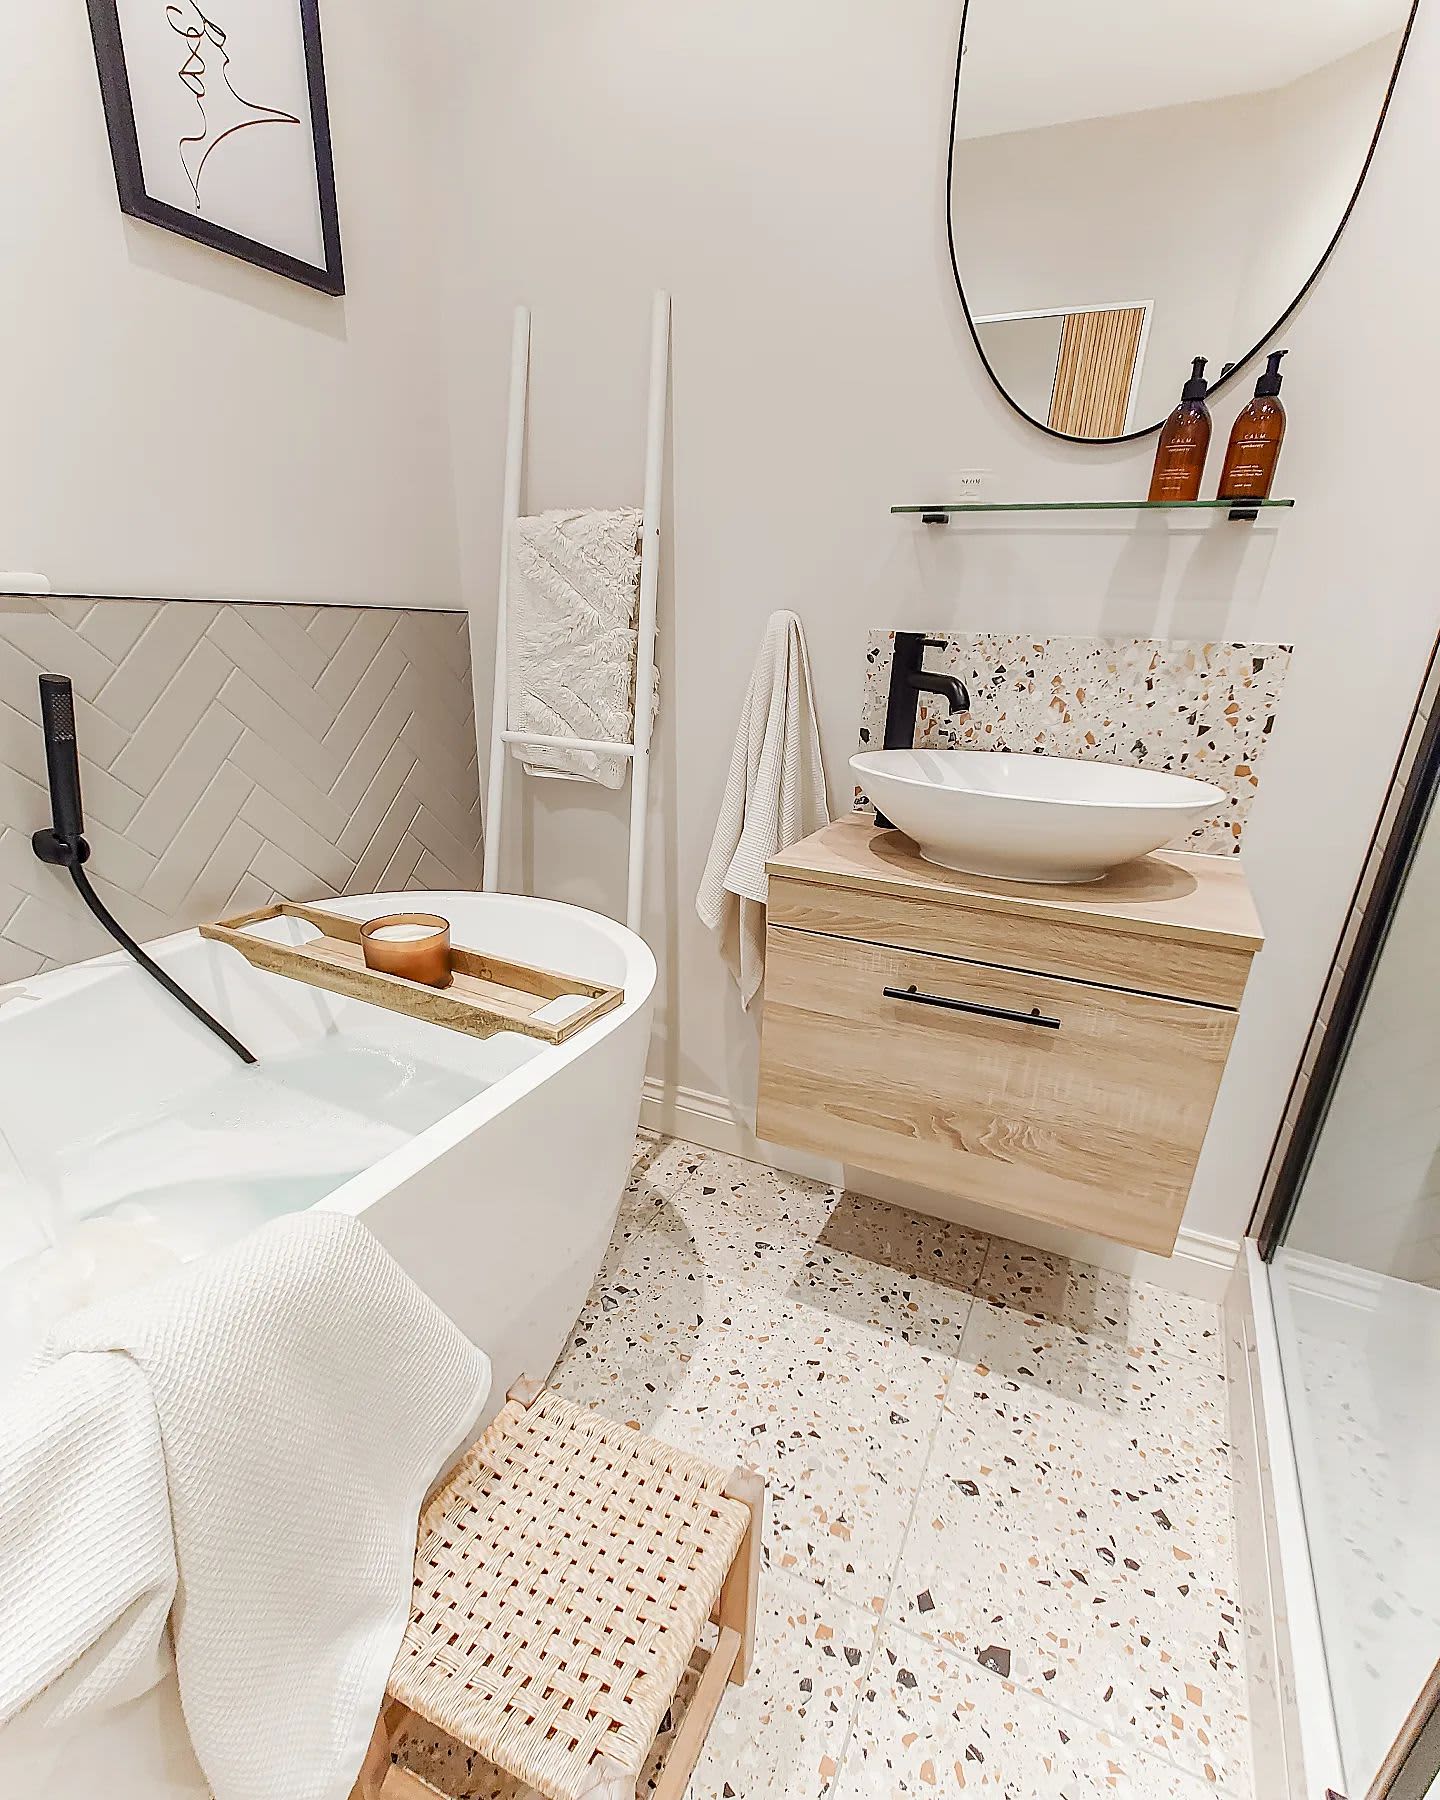 18 Small Bathroom Ideas for Decorating Tiny Spaces   Apartment Therapy